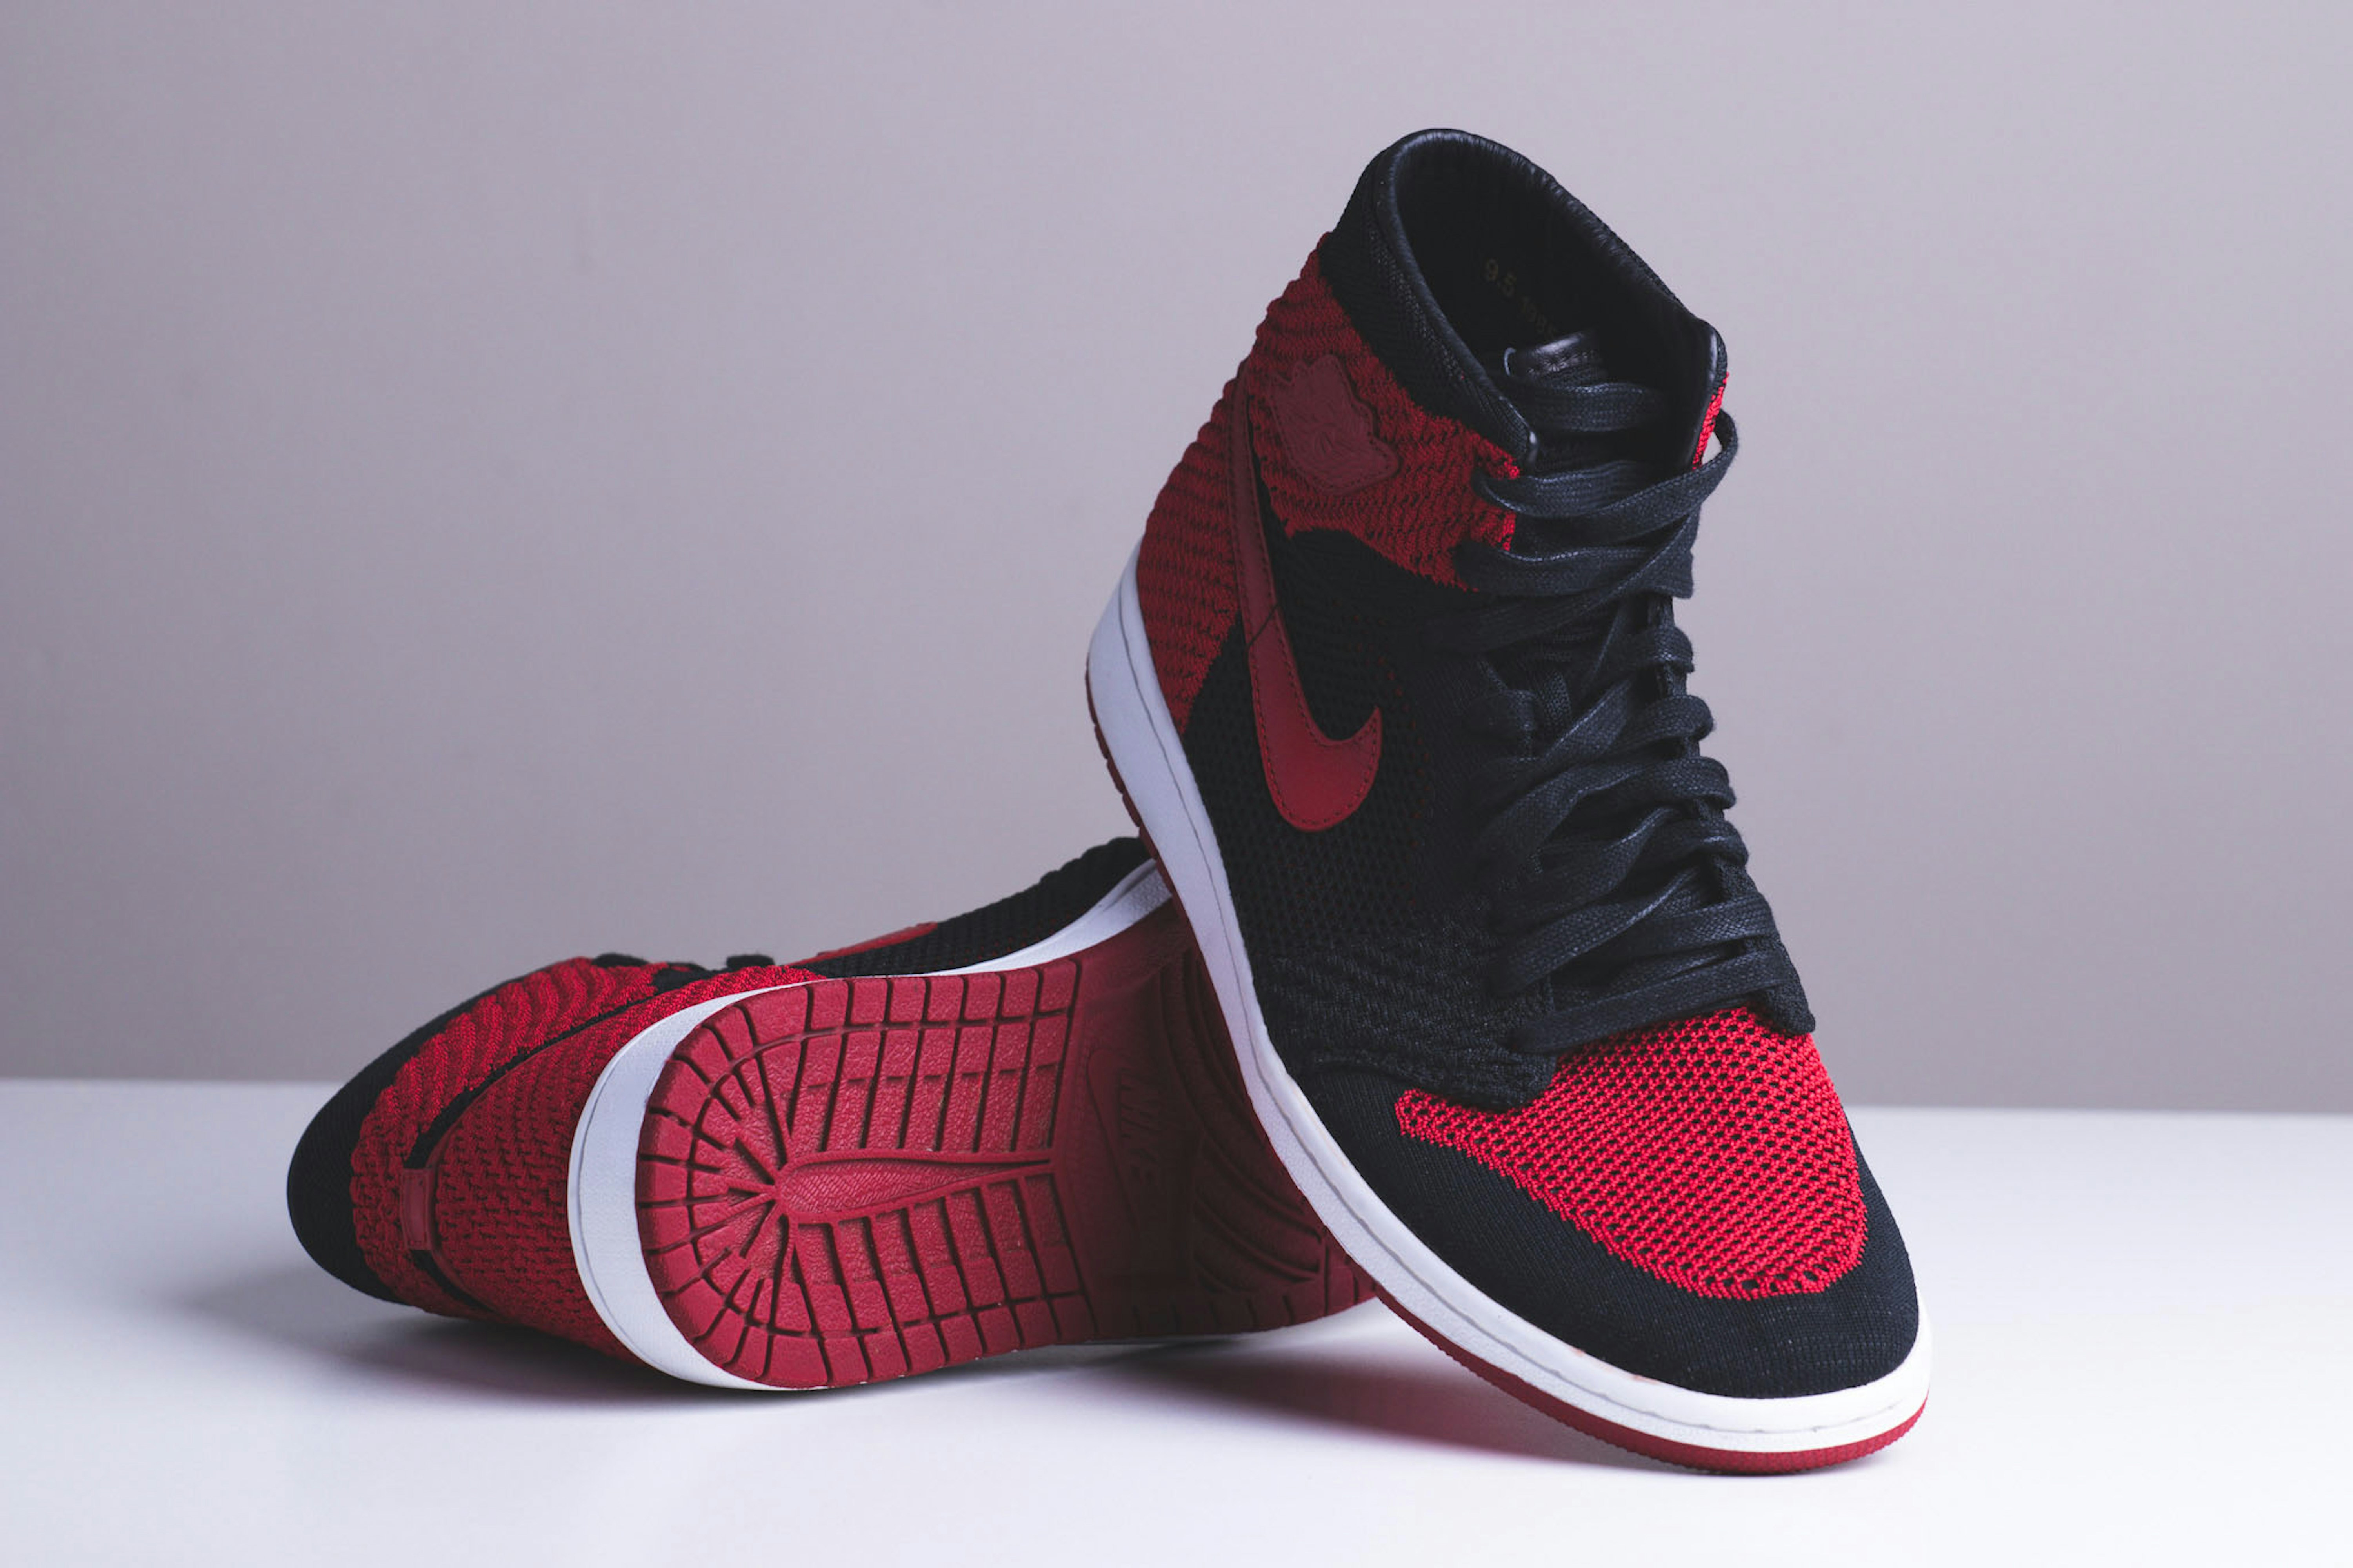 red and black nike high top